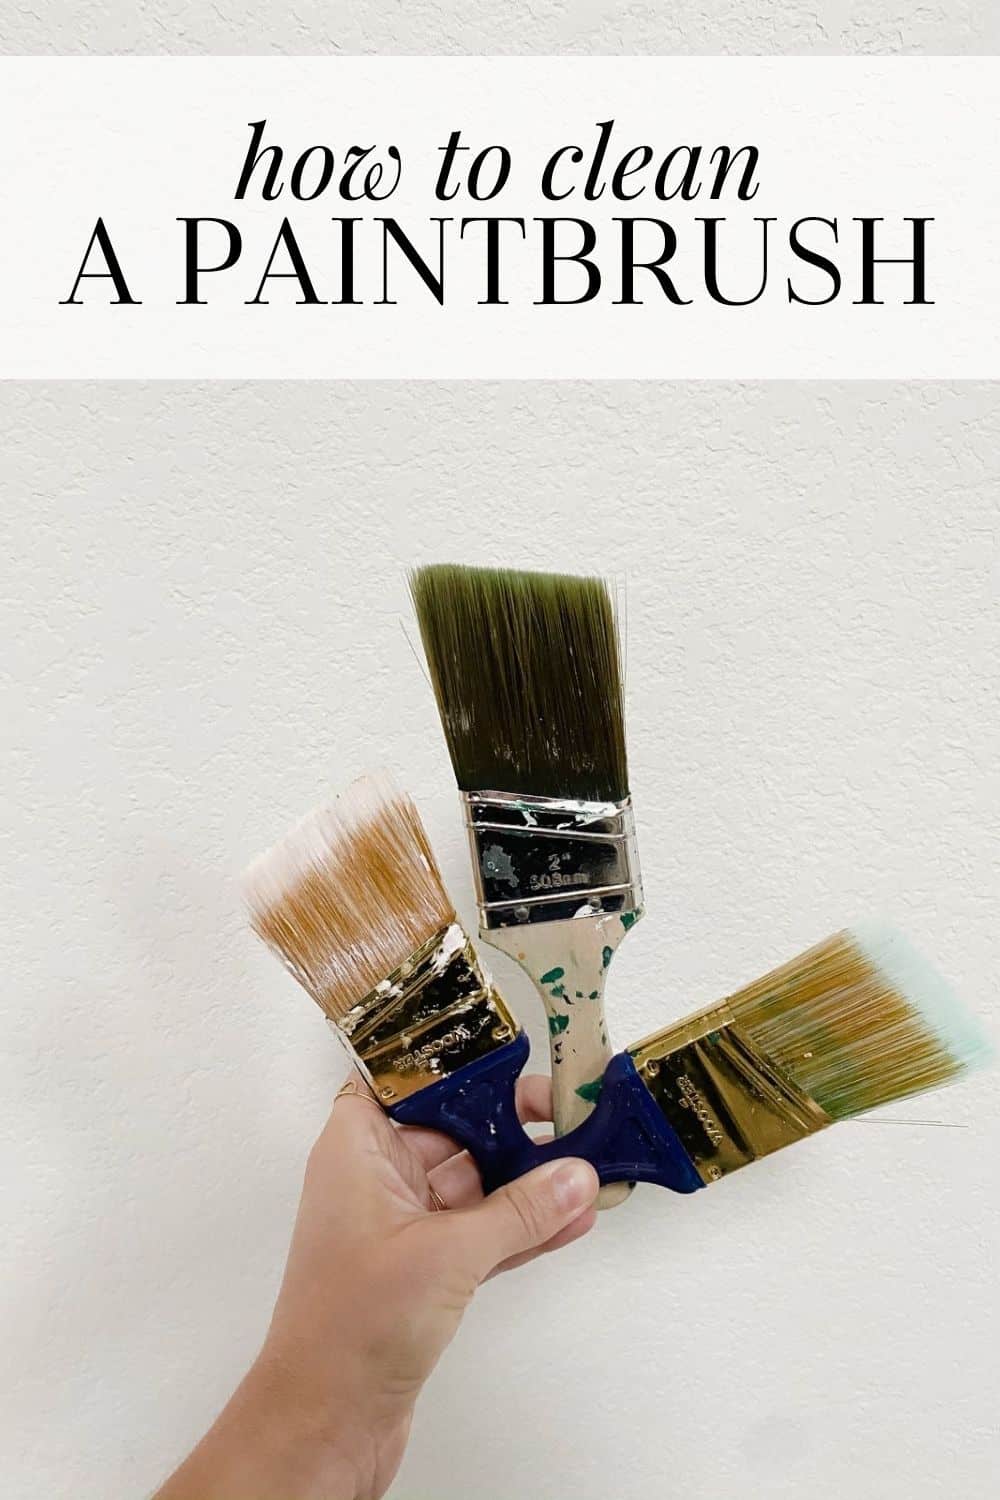 How to Clean Paintbrushes Like a Pro